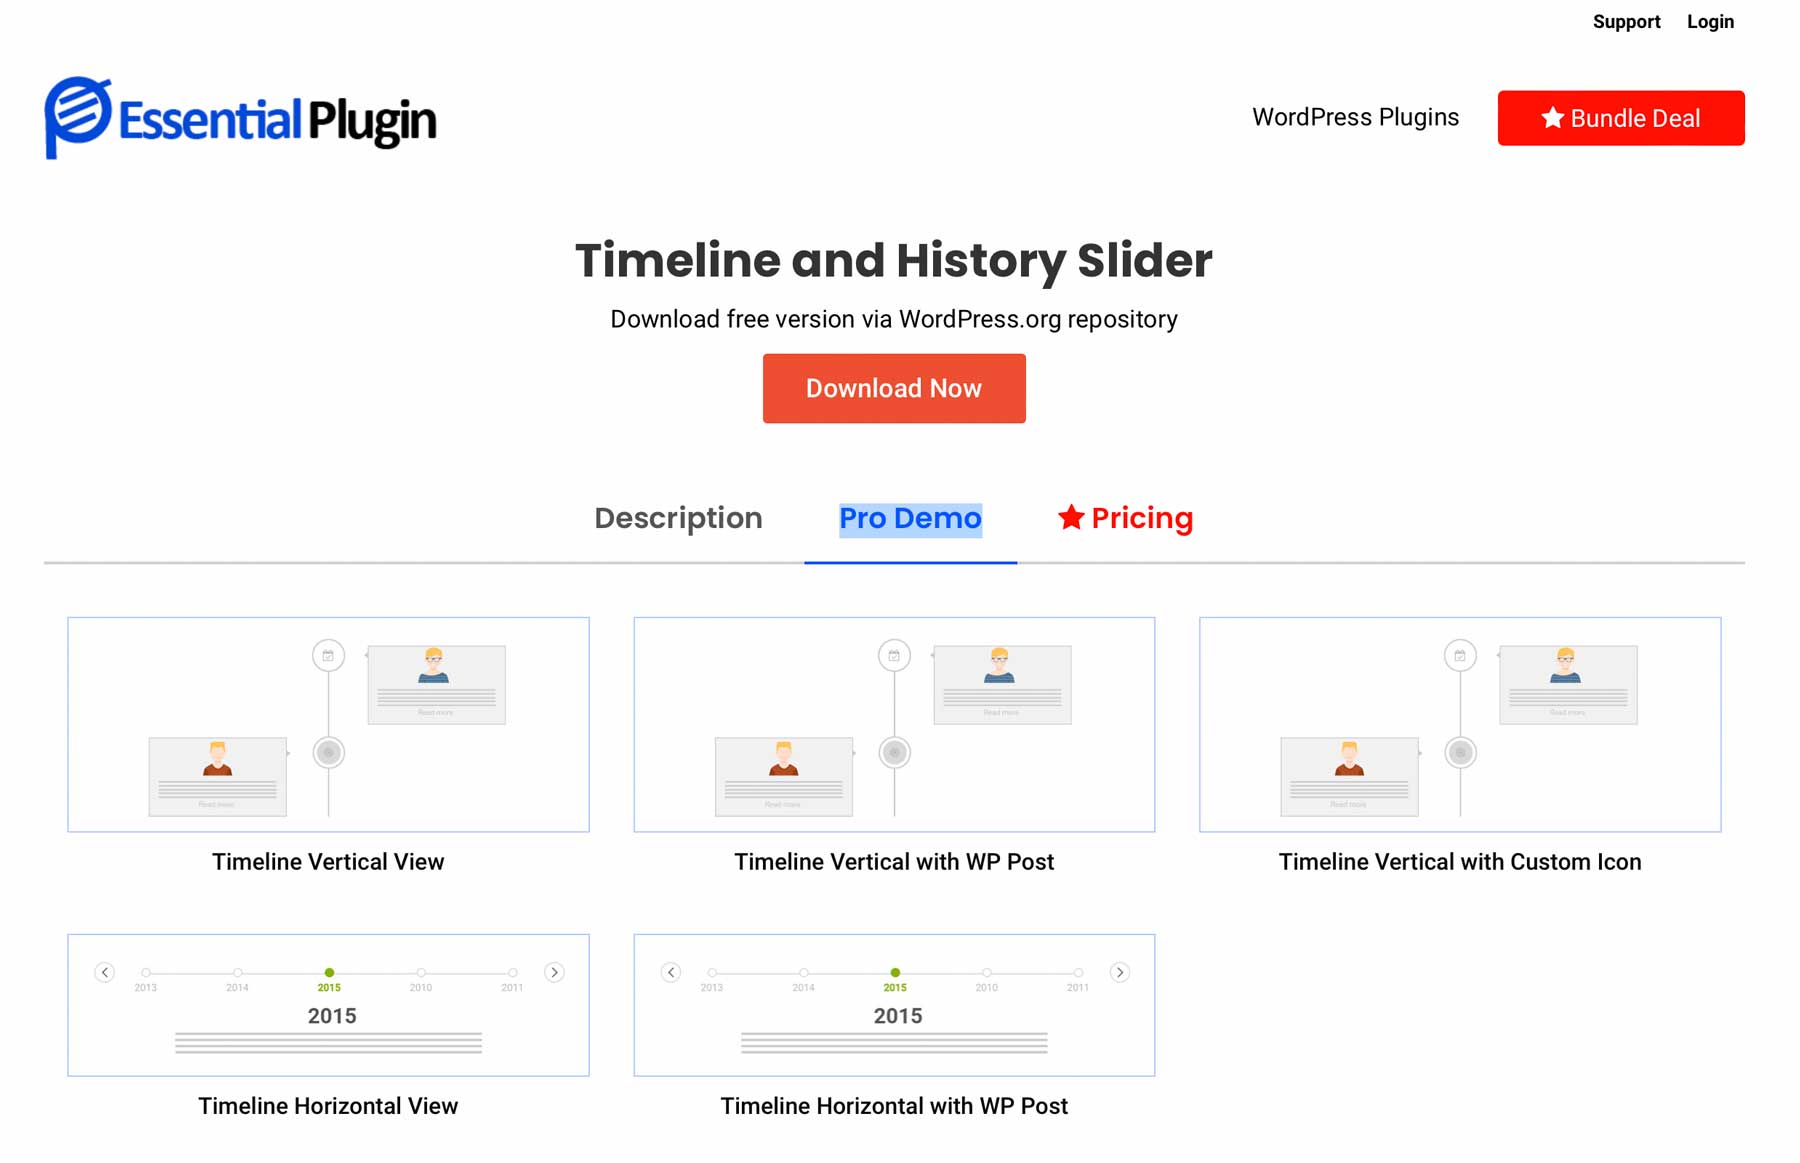 The Timeline and History Slider plugin for WordPress